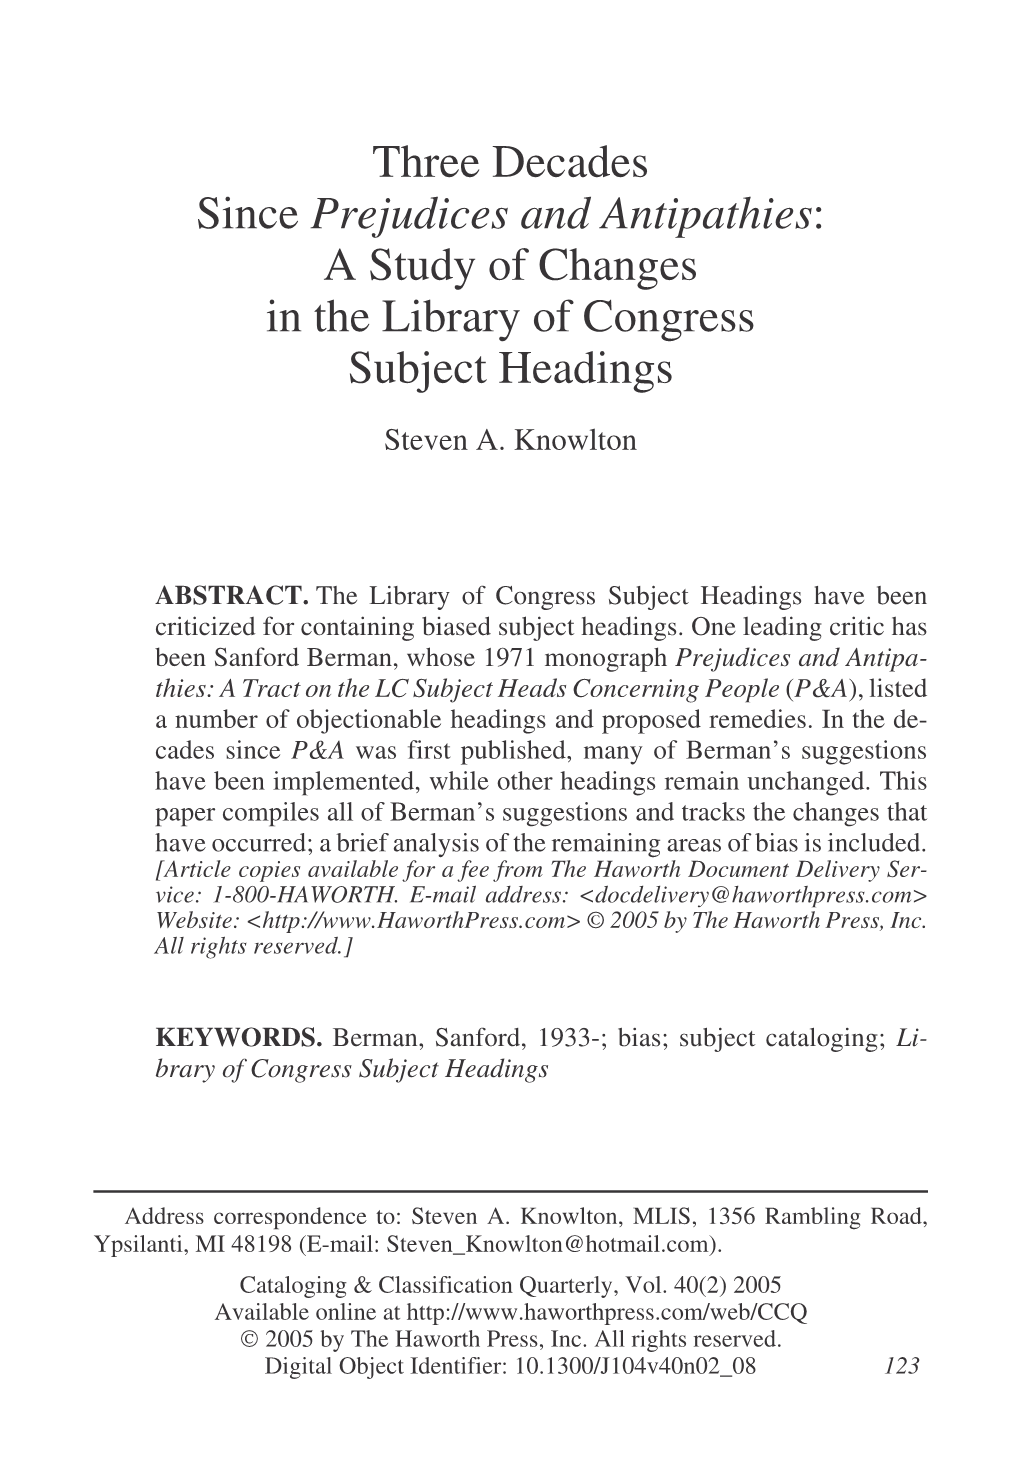 Three Decades Since Prejudices and Antipathies: a Study of Changes in the Library of Congress Subject Headings